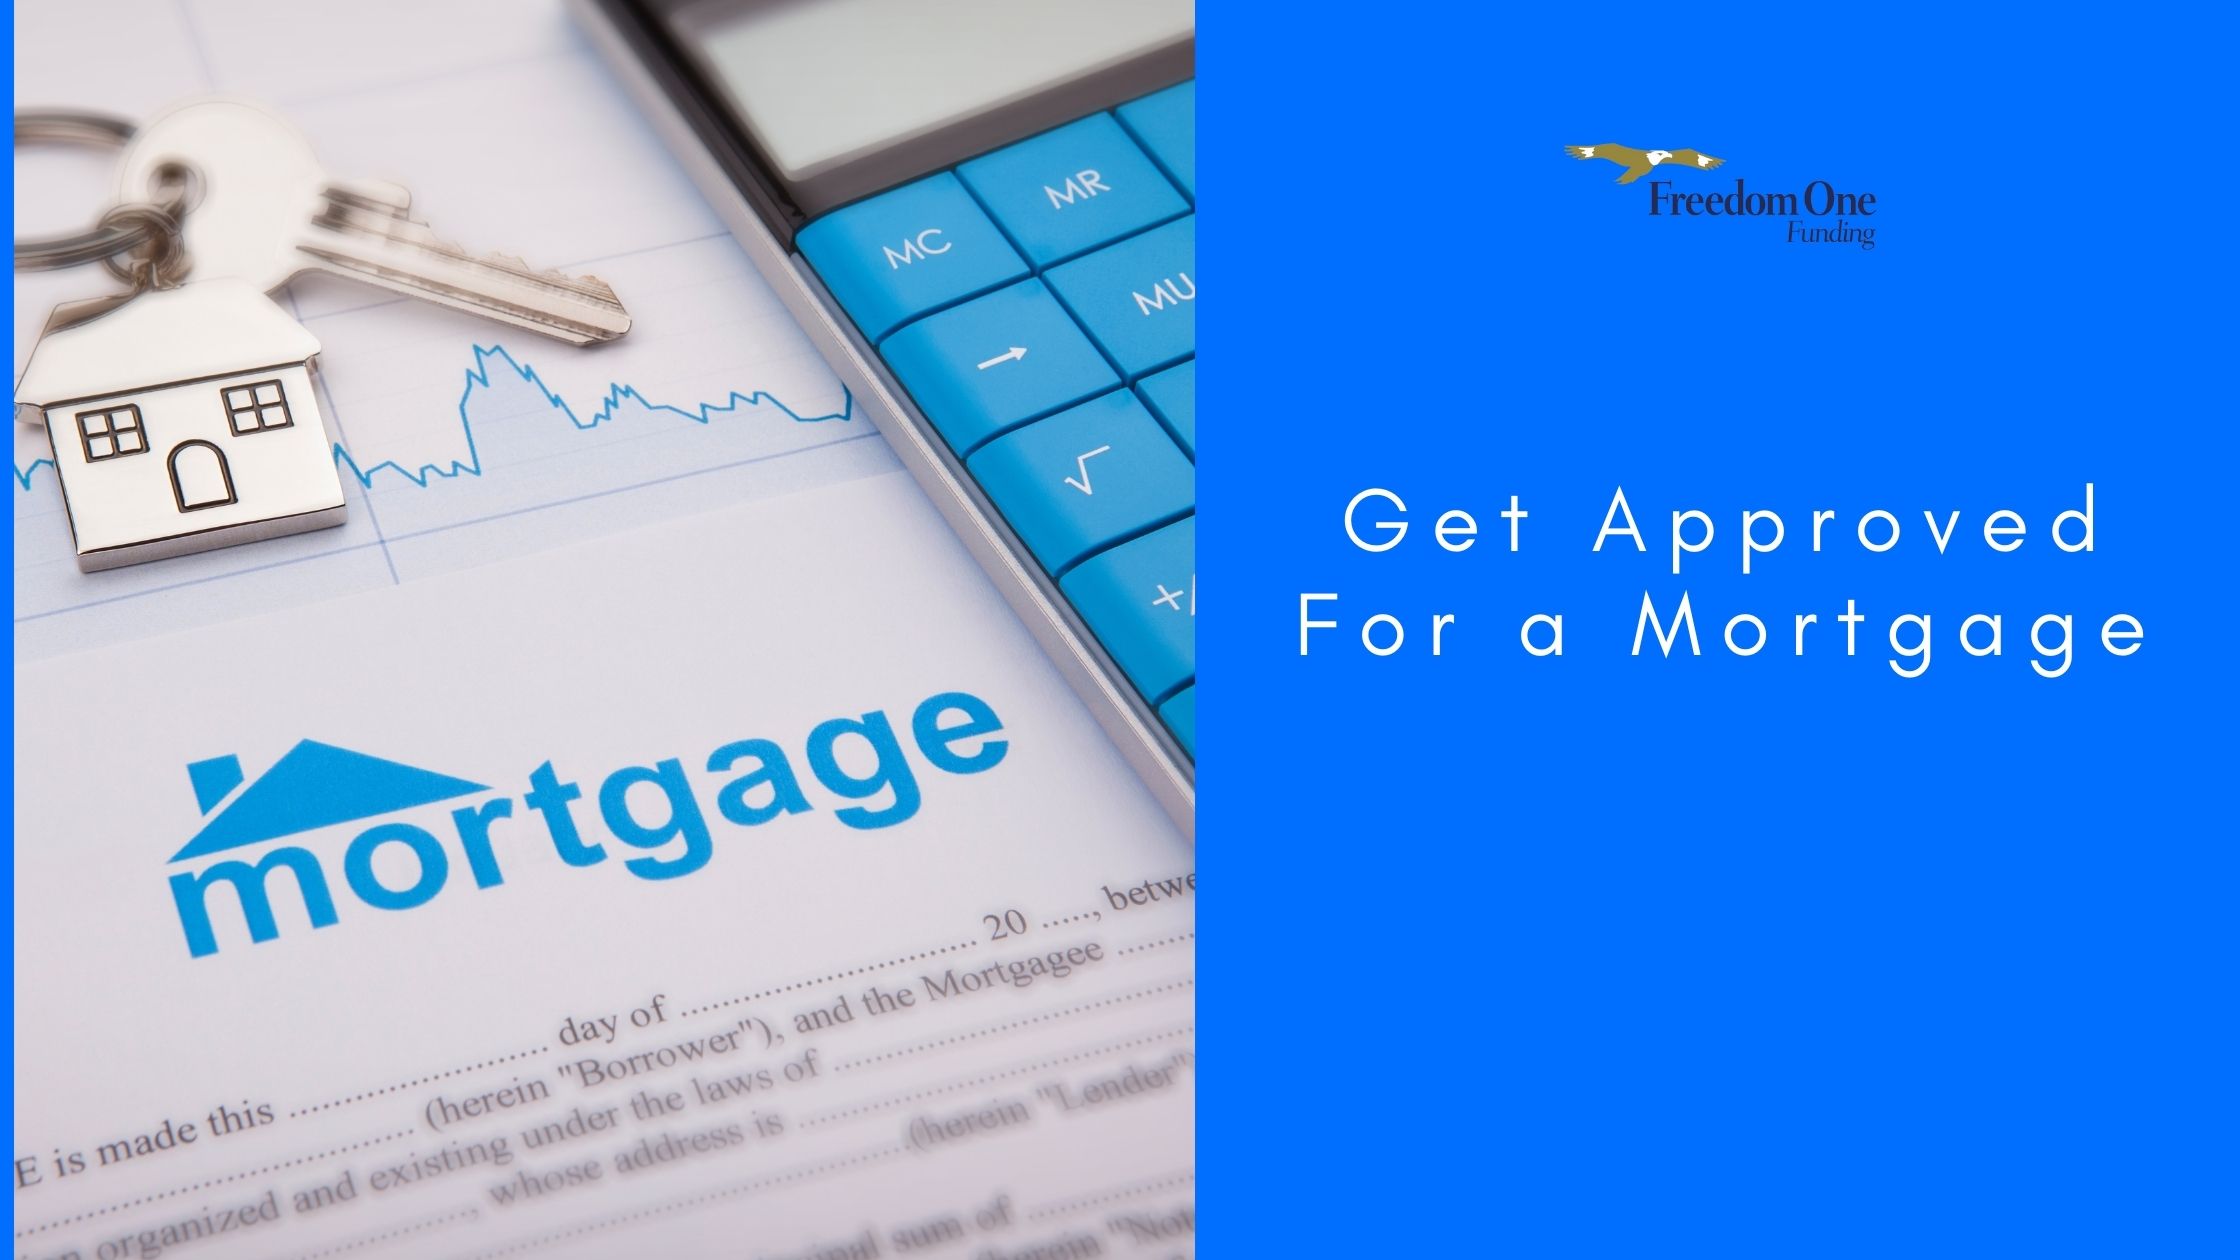 Get Approved For a Mortgage